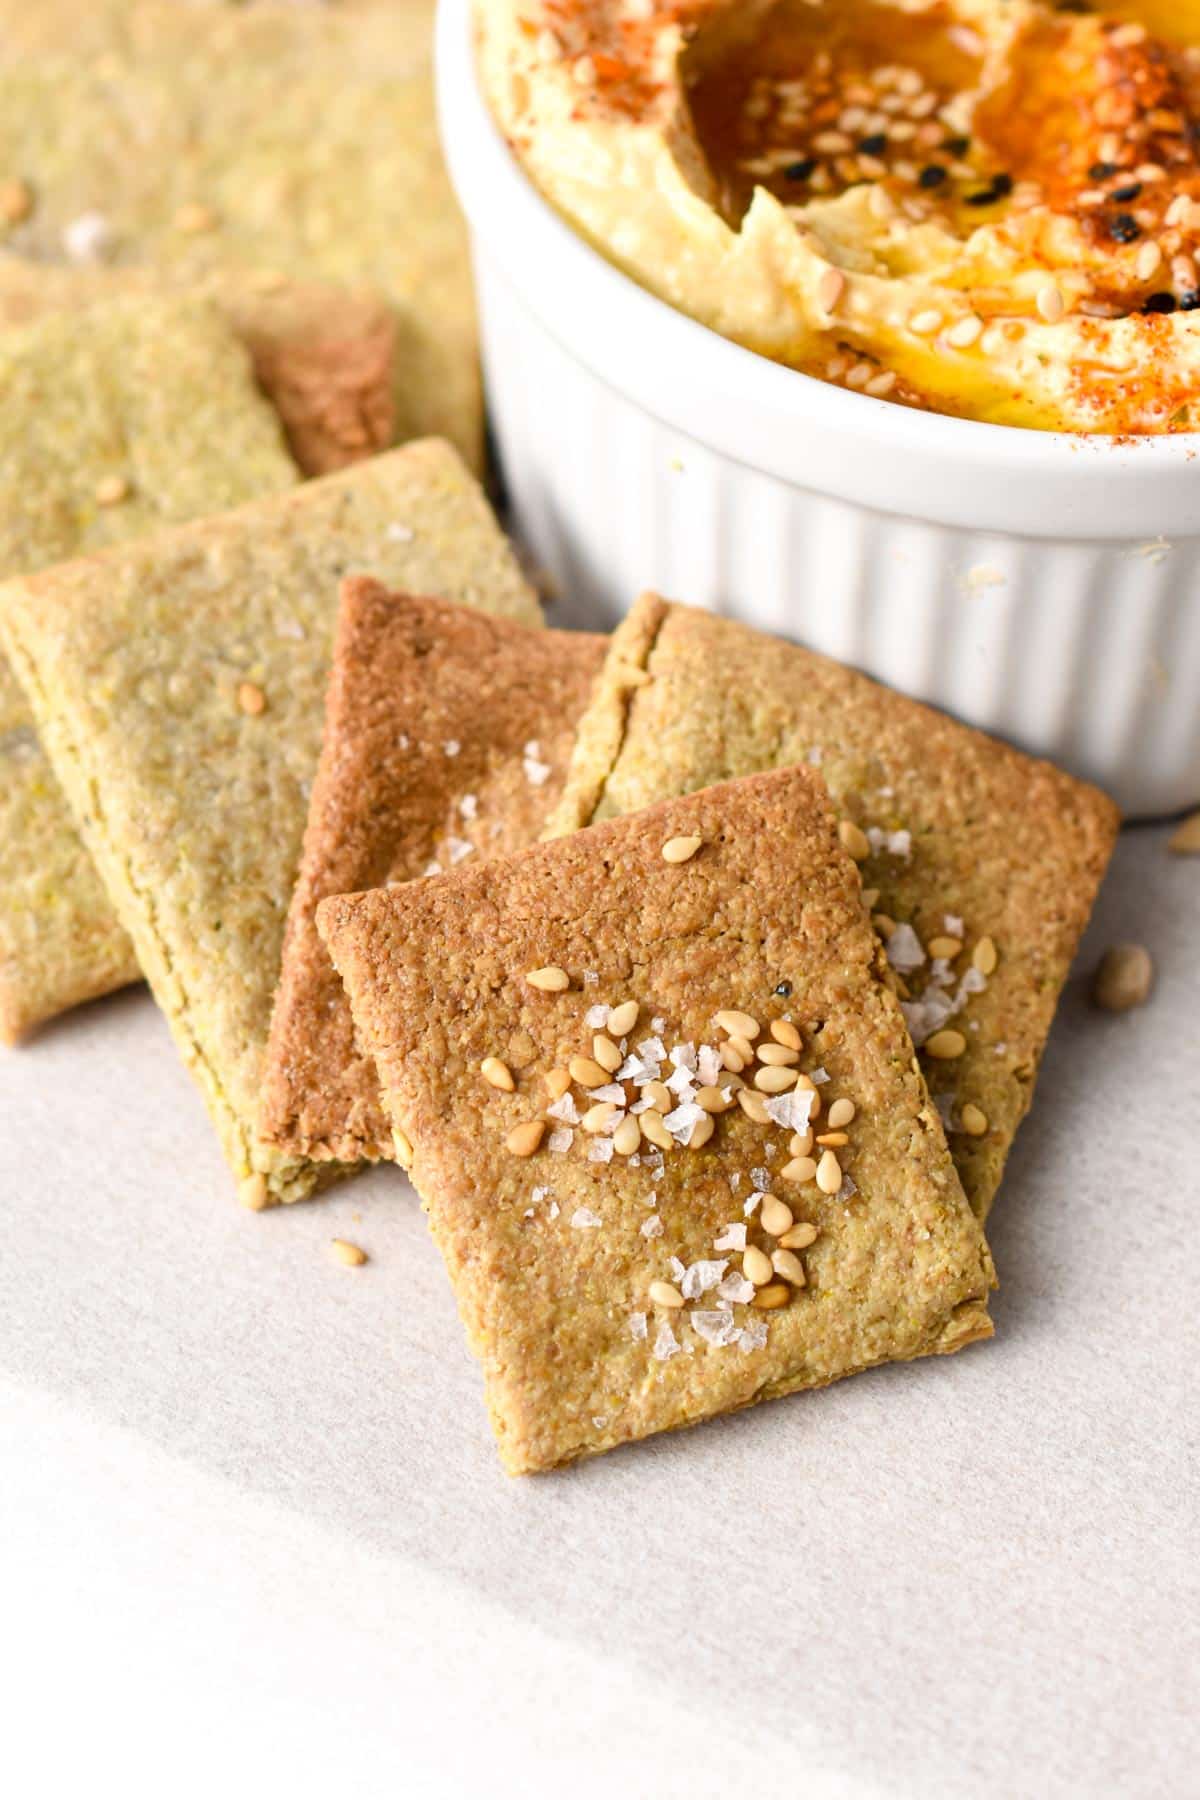 Sunflower Seed Crackers